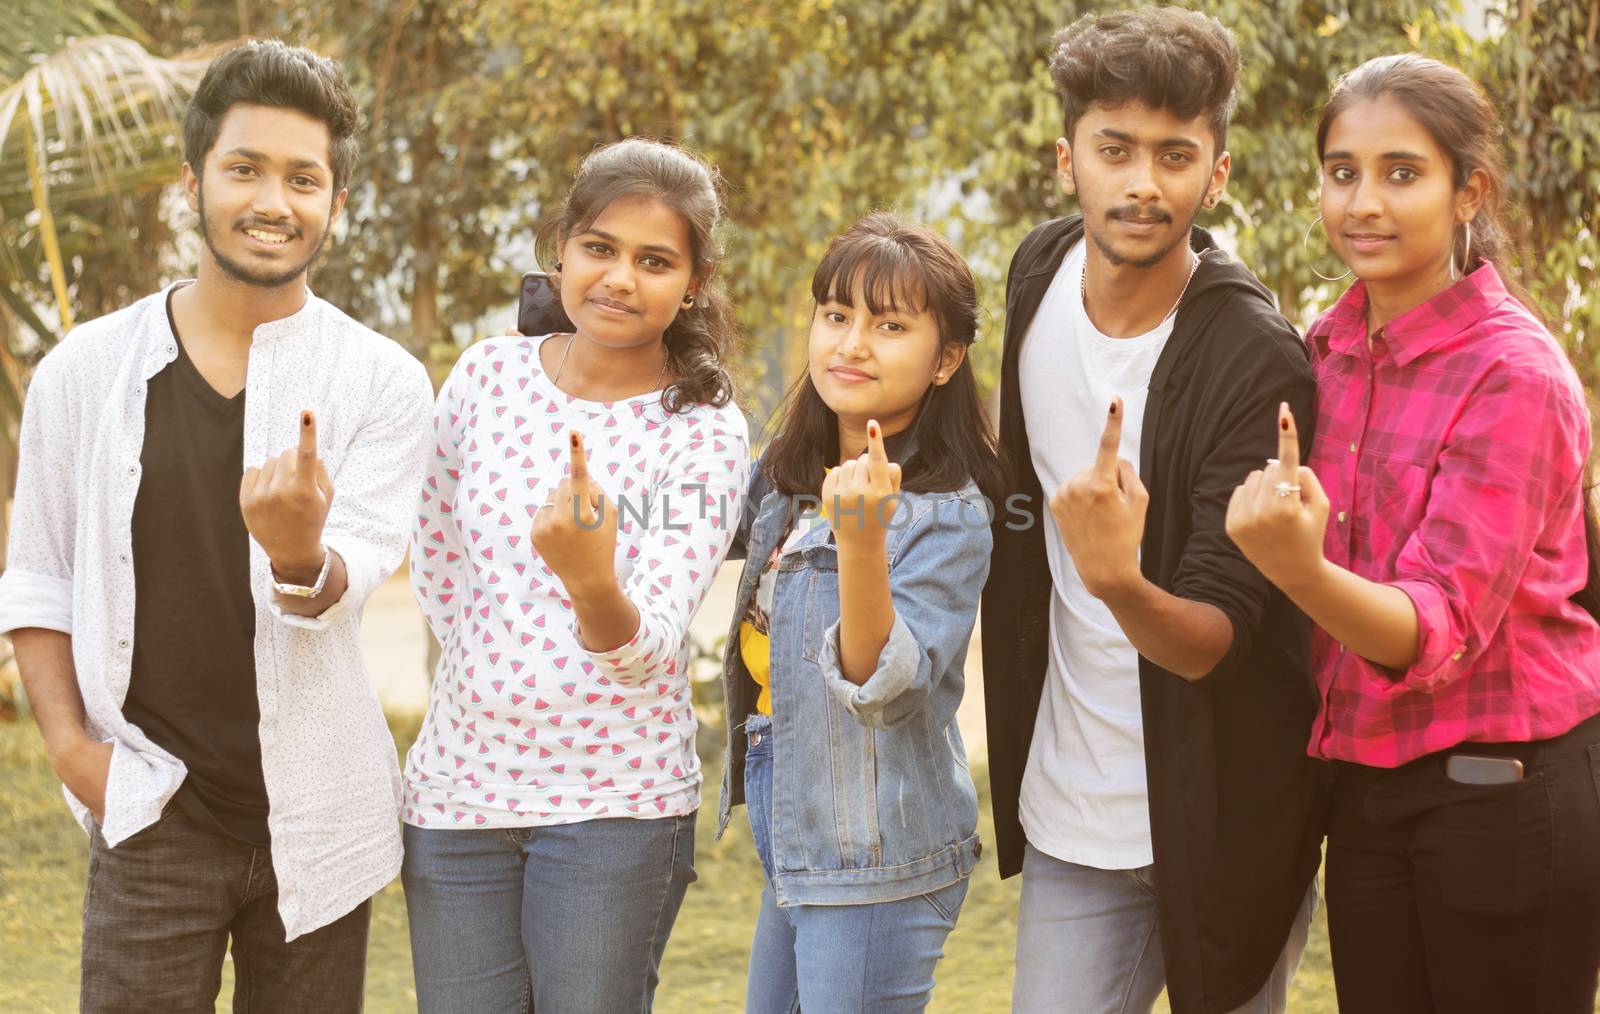 Group of teenager friends showing ink marked fingers outside polling station or booth after casting votes - Concept of Indian election or vote casting system. by lakshmiprasad.maski@gmai.com